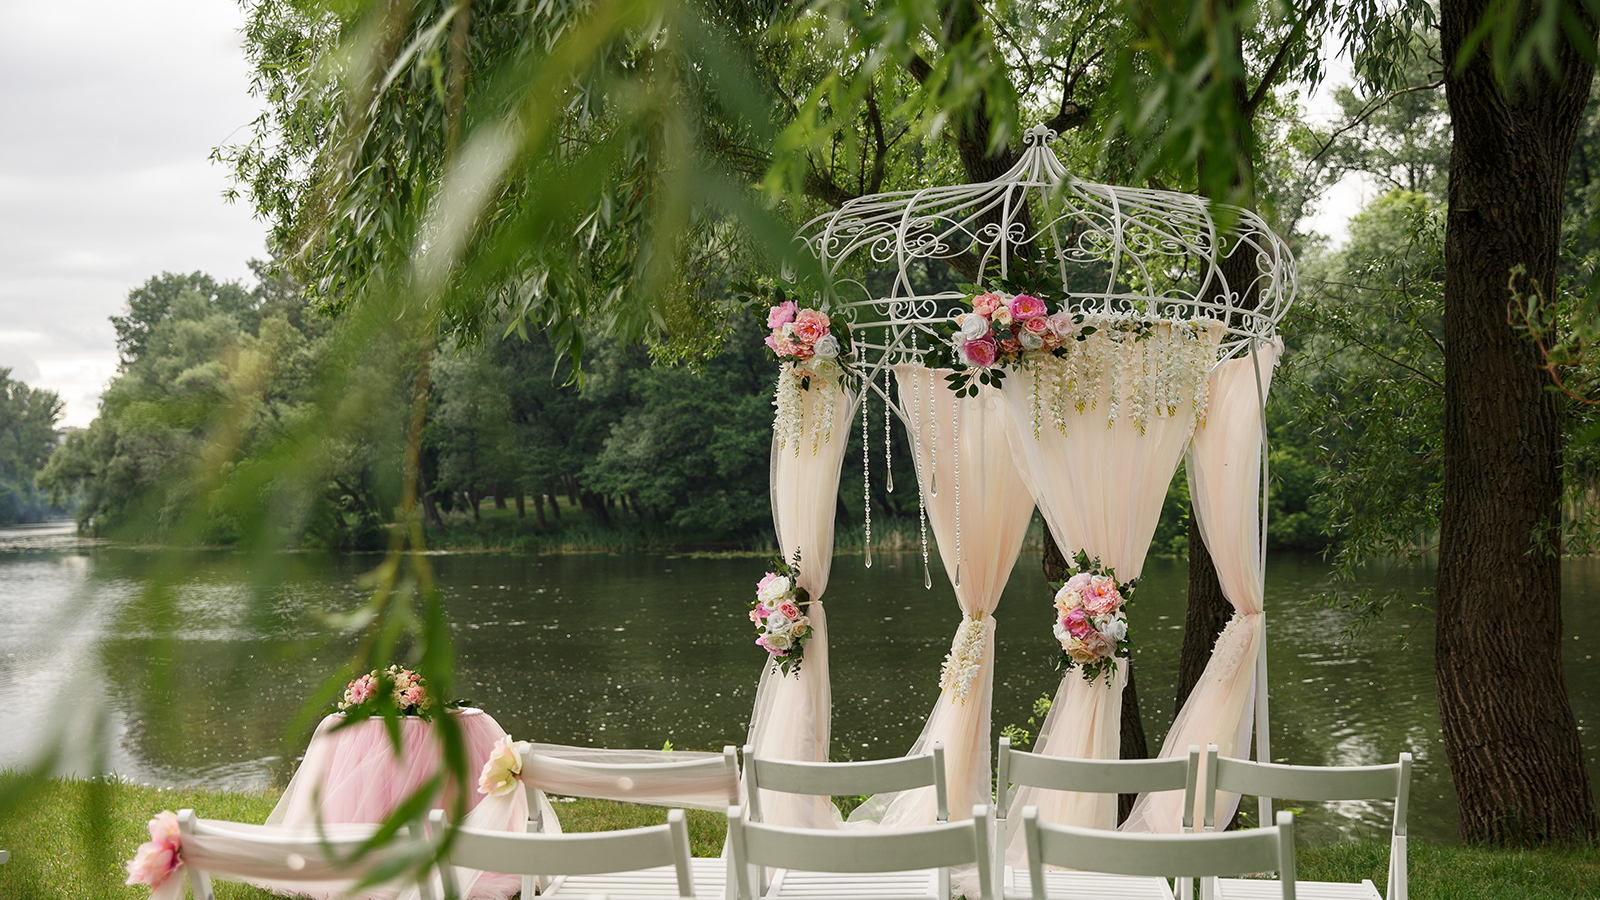 Wedding ceremony outdoor wedding set up with chairs and wedding arch with flowers decoration